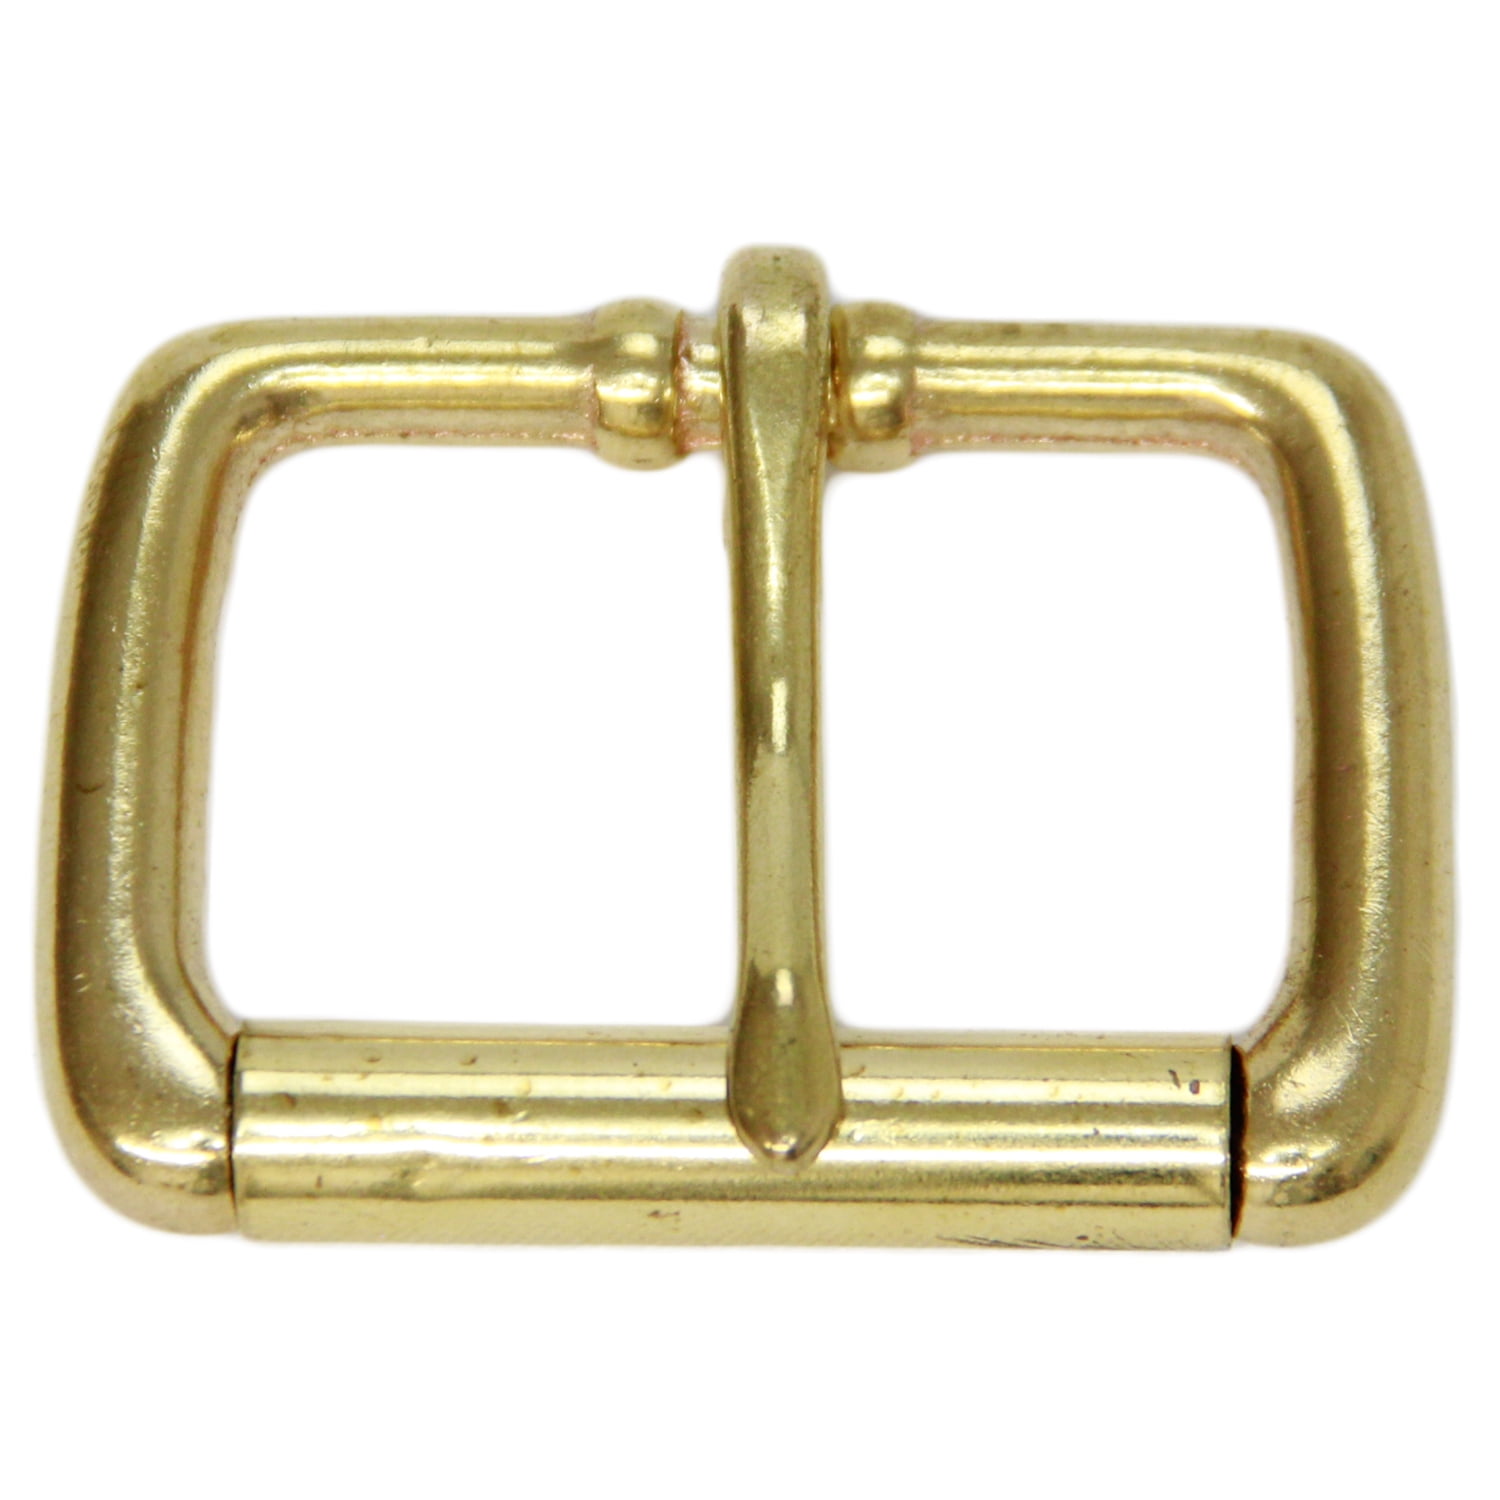 Solid Brass Replacement Belt Buckle Roller For 40mm Width Nickel Free - www.bagsaleusa.com/product-category/belts/